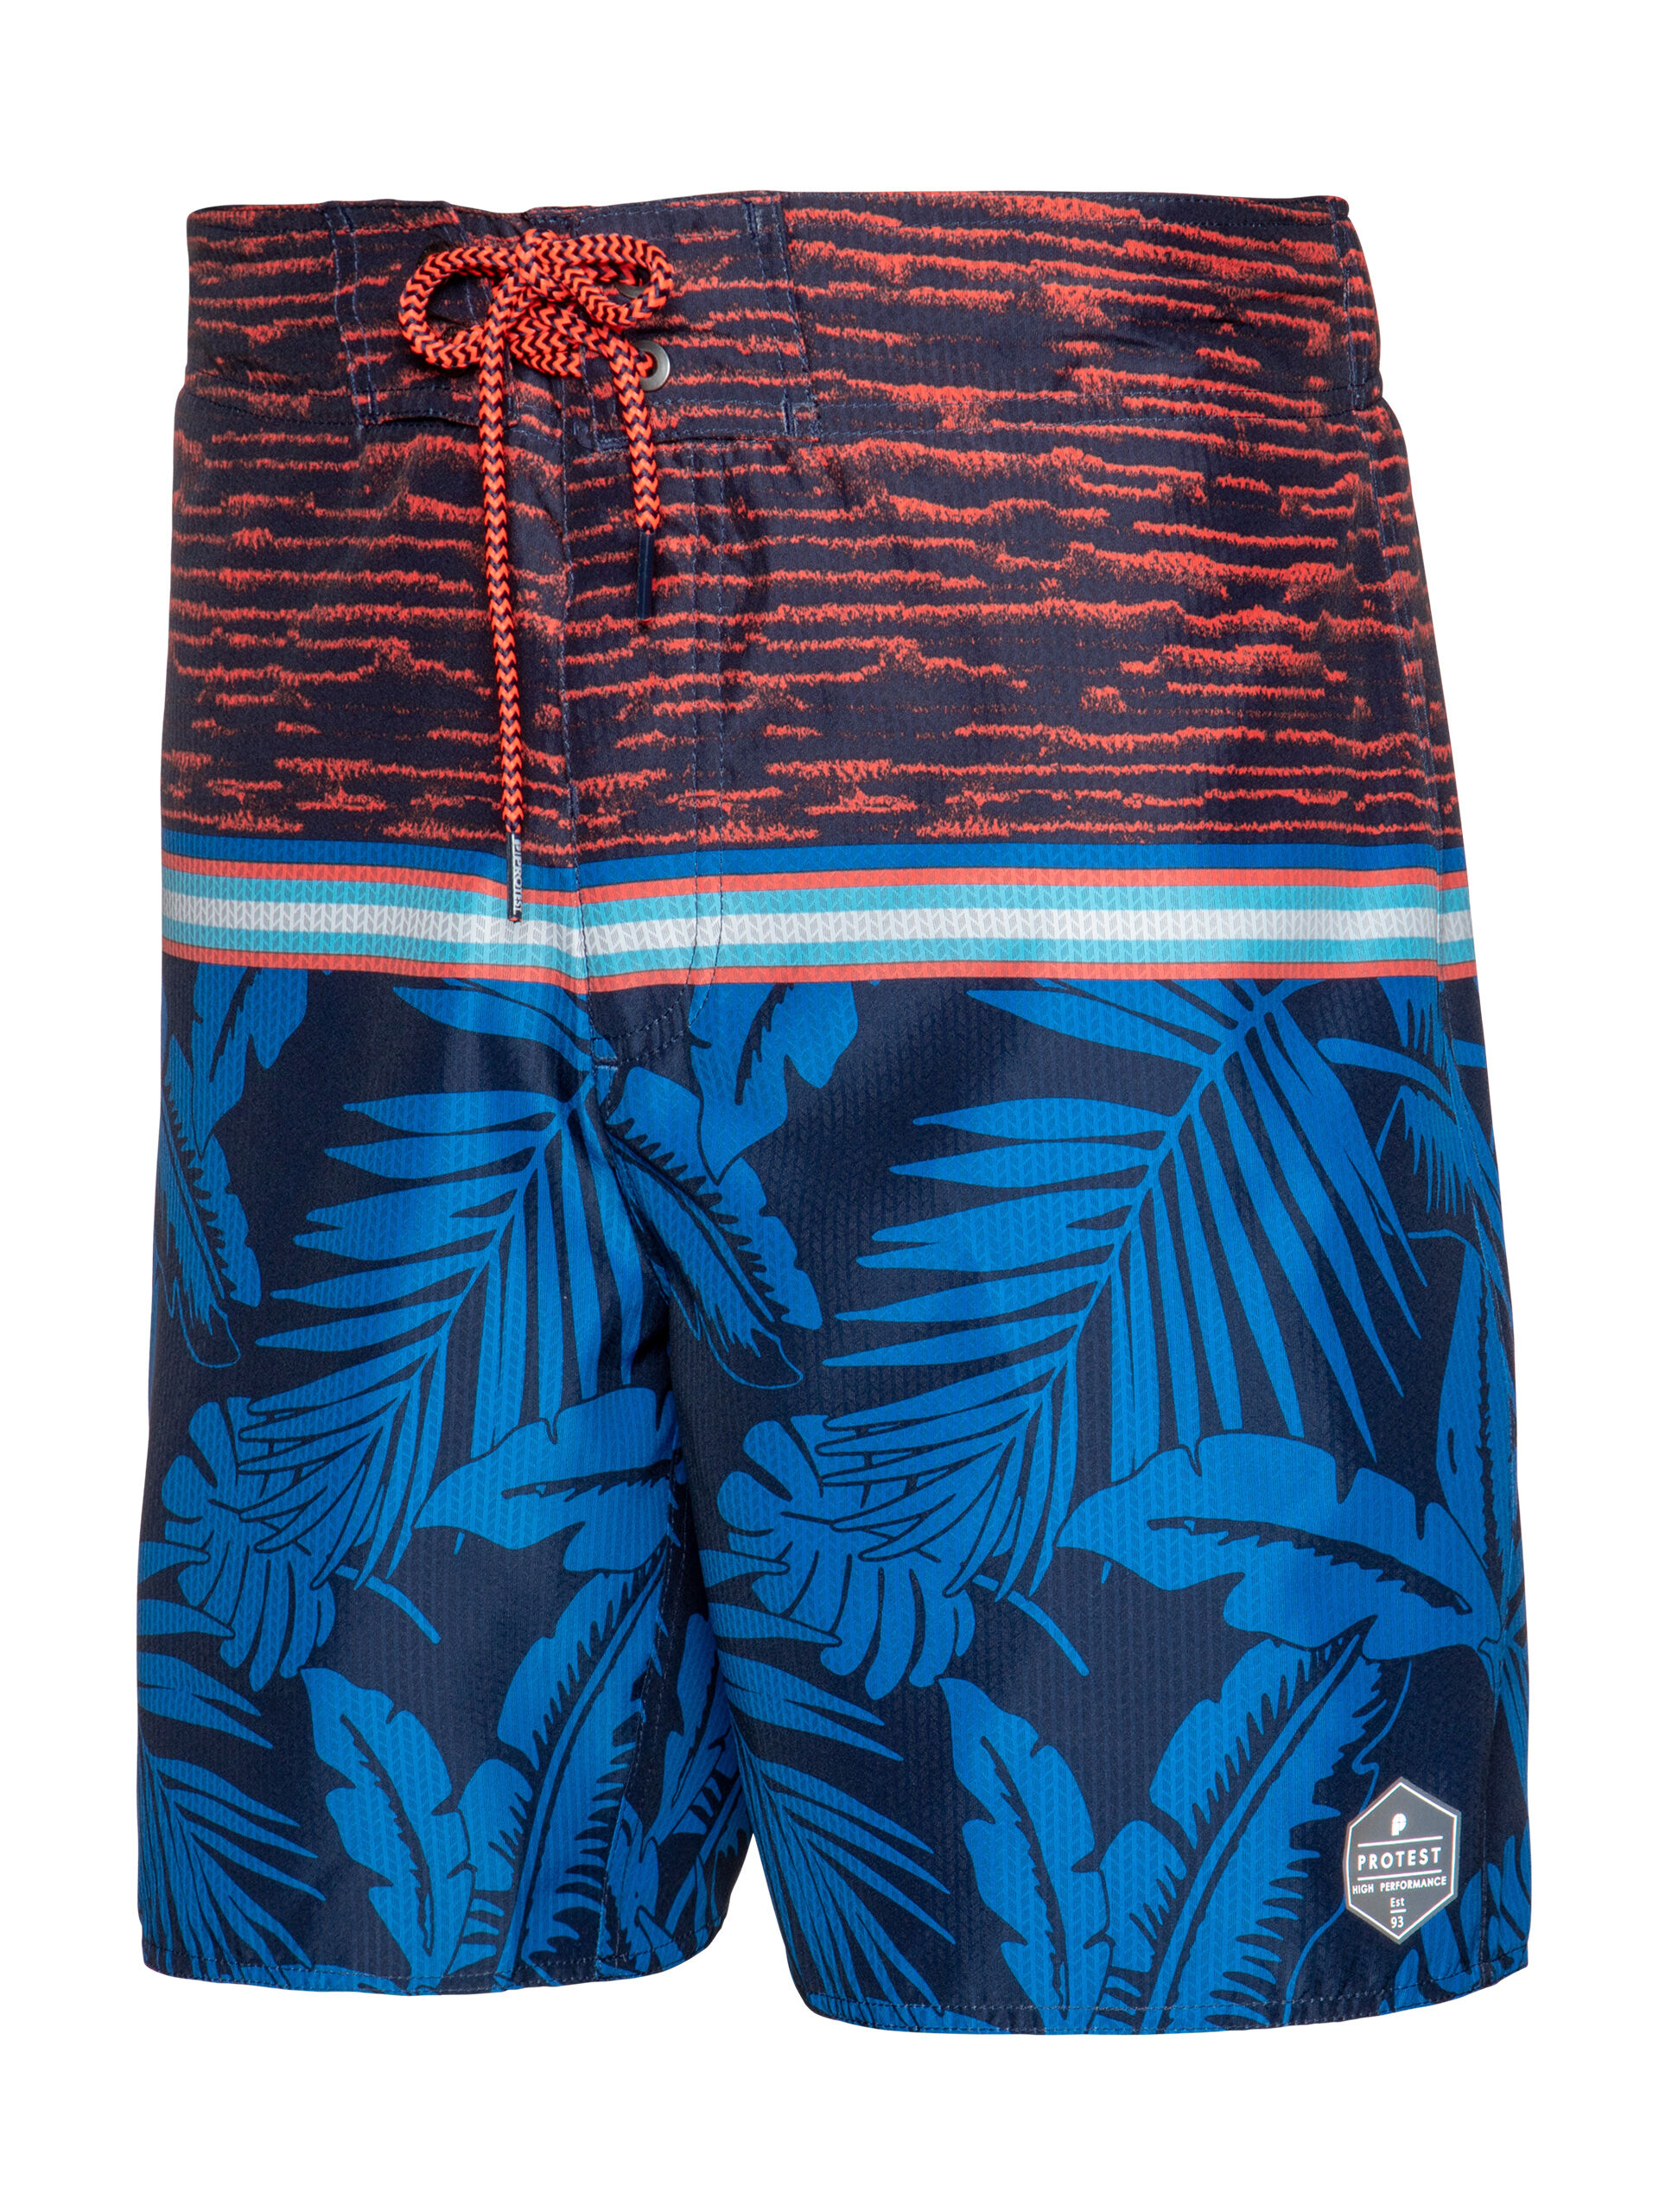 Protest Firsby - Swim shorts - Men's